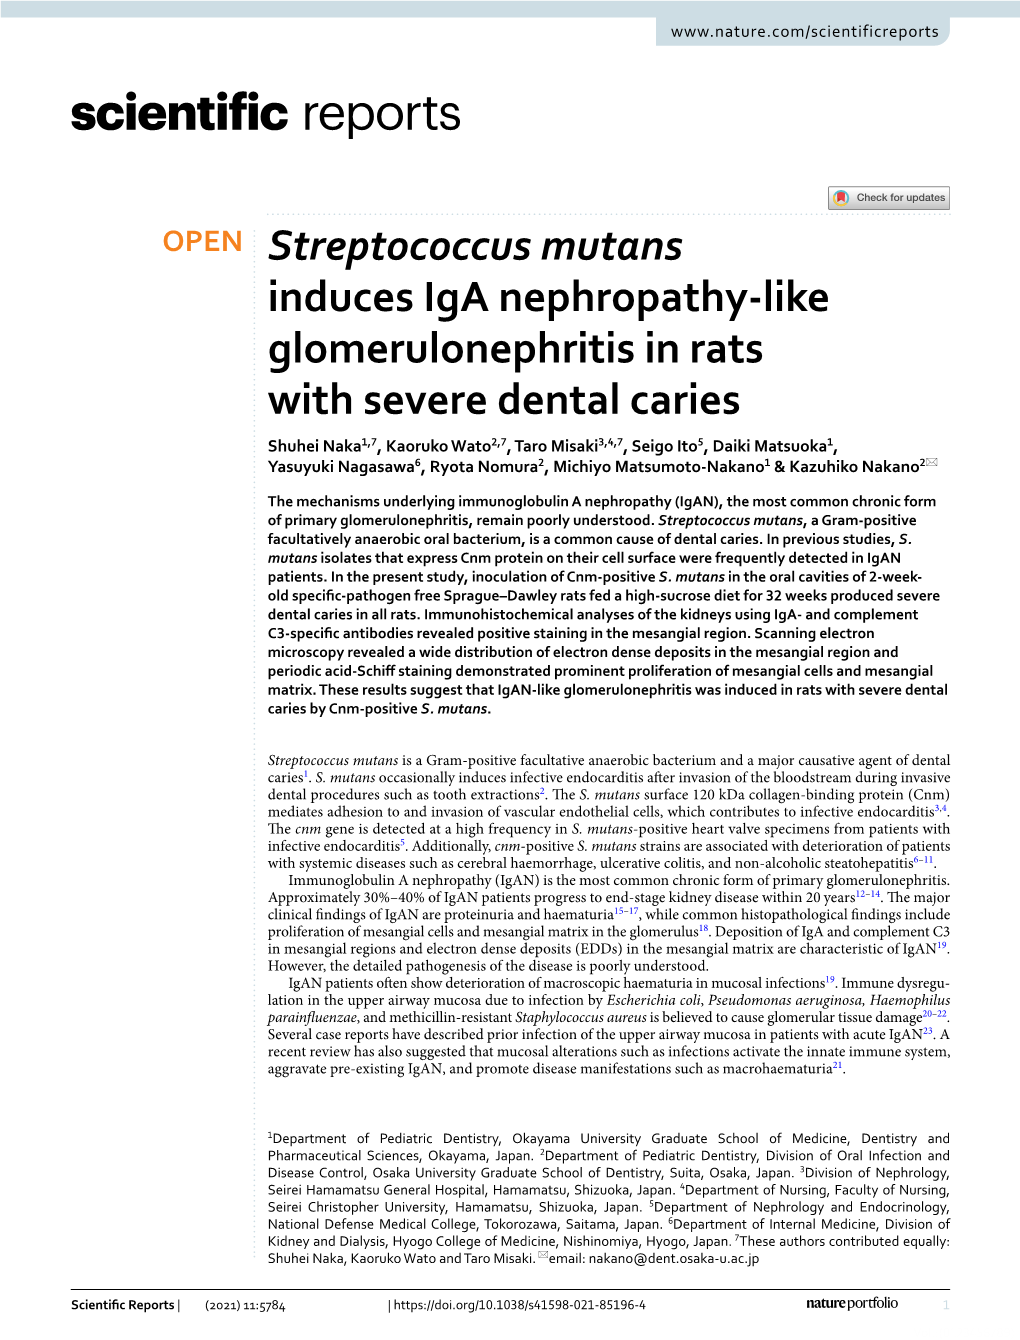 Streptococcus Mutans Induces Iga Nephropathy-Like Glomerulonephritis in Rats with Severe Dental Caries